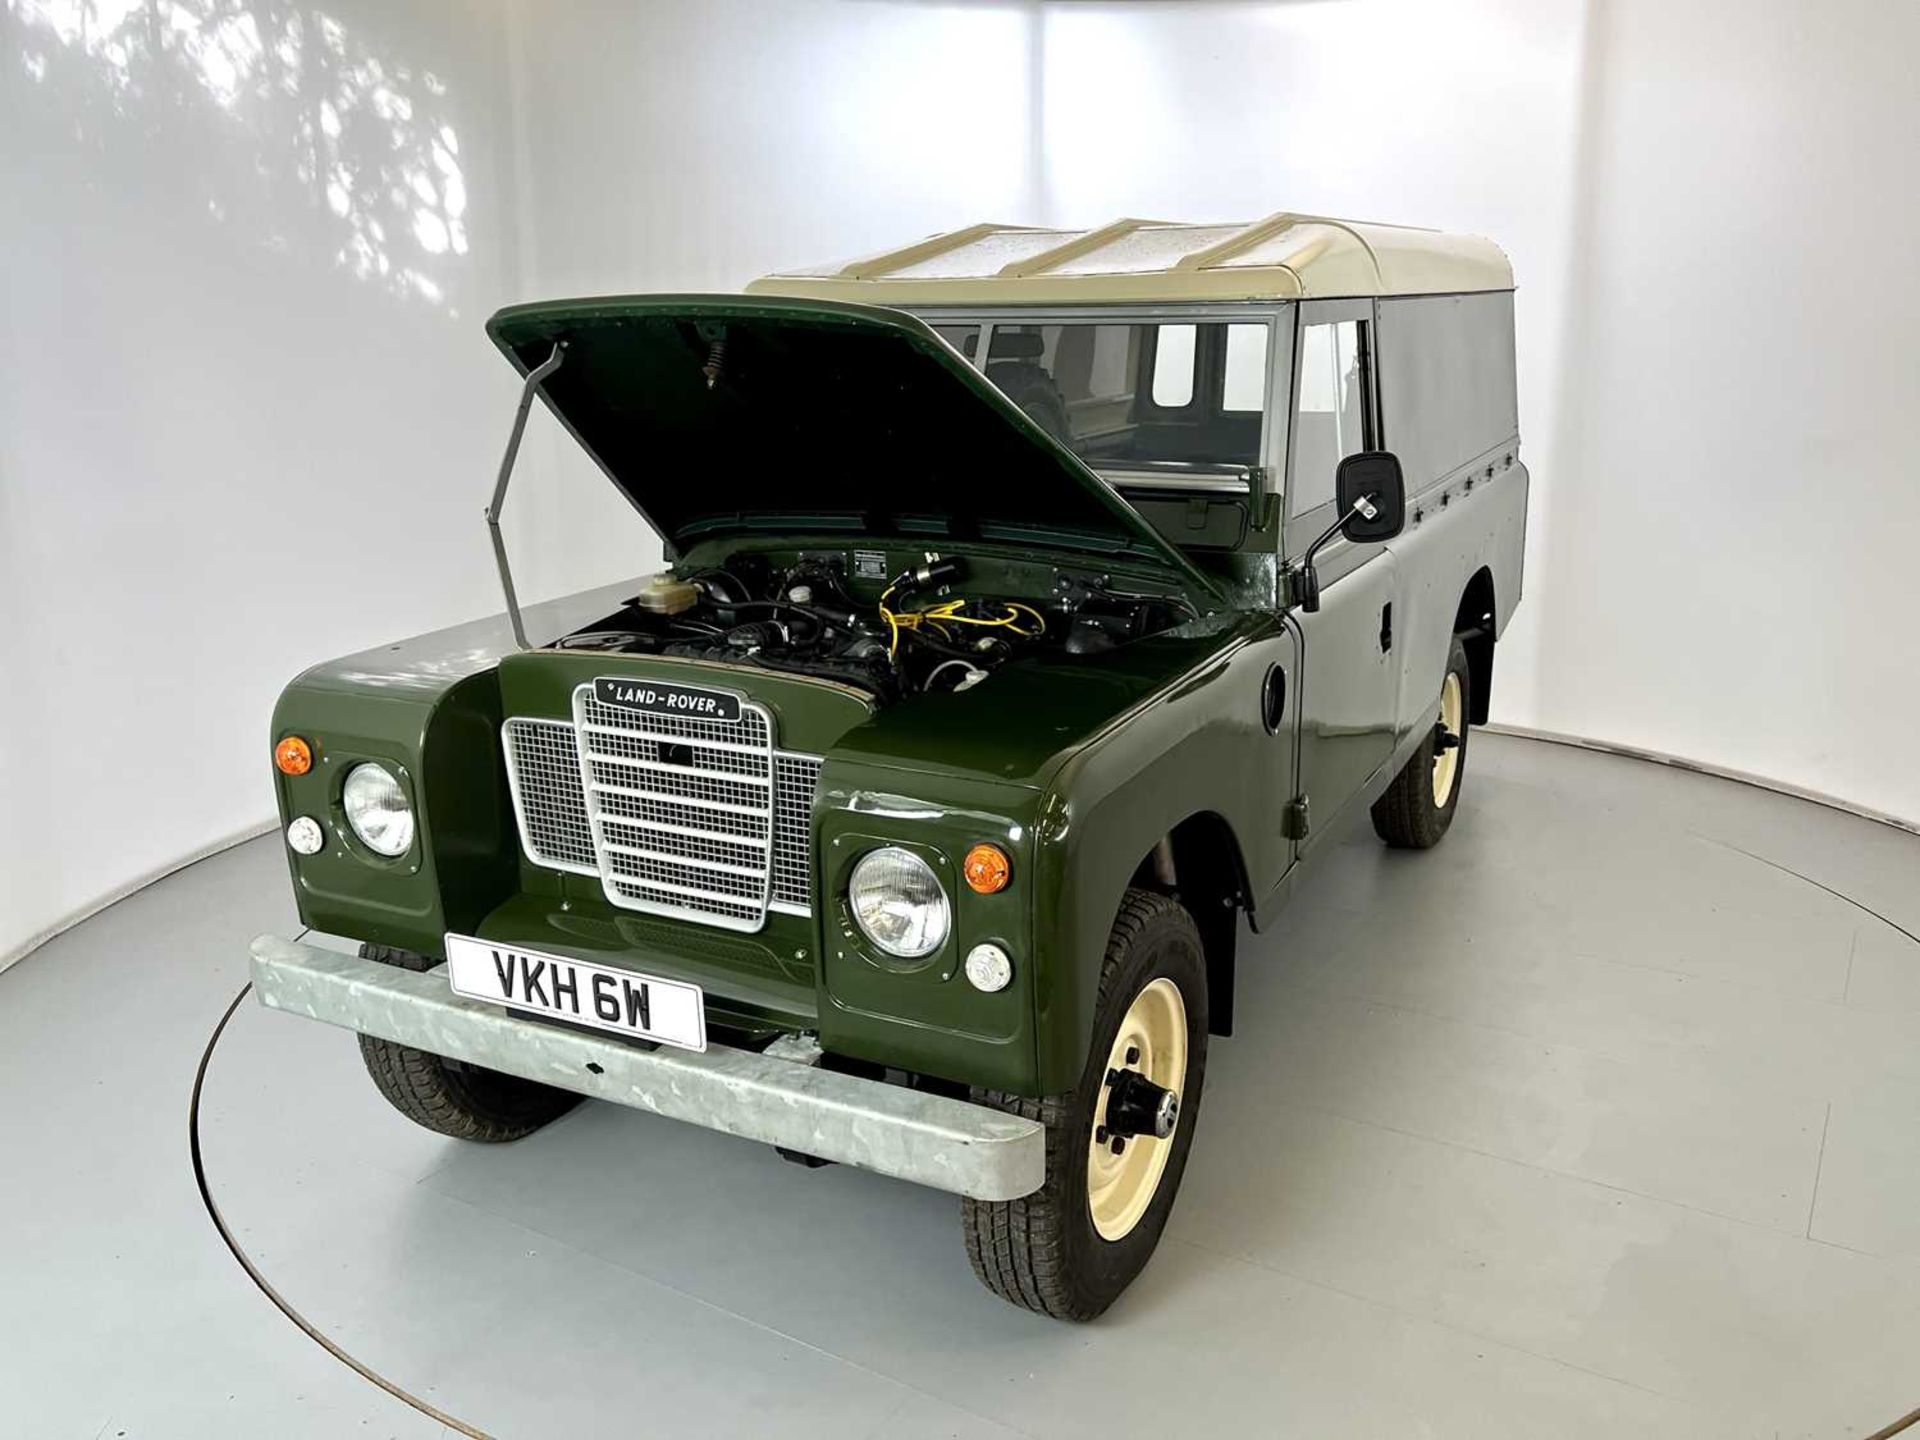 1981 Land Rover Series 3 - 6 Cylinder - Image 30 of 31